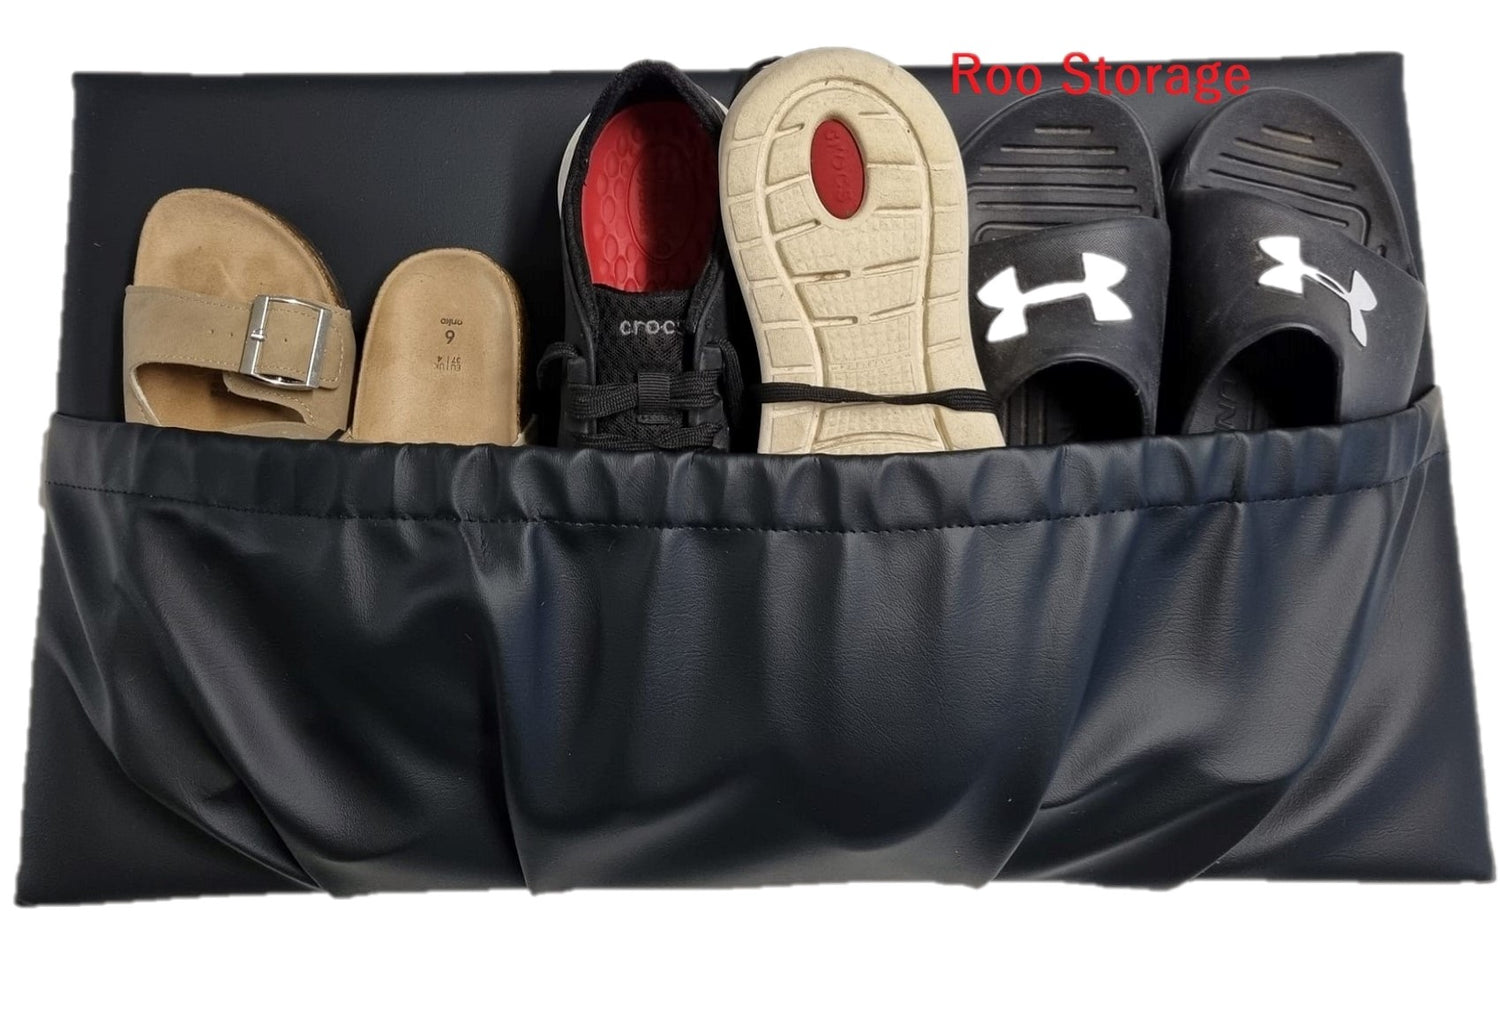 Long Pockets/ shoe storage pocket 600mm x 350mm Vinyl, synthetic leather and fabric